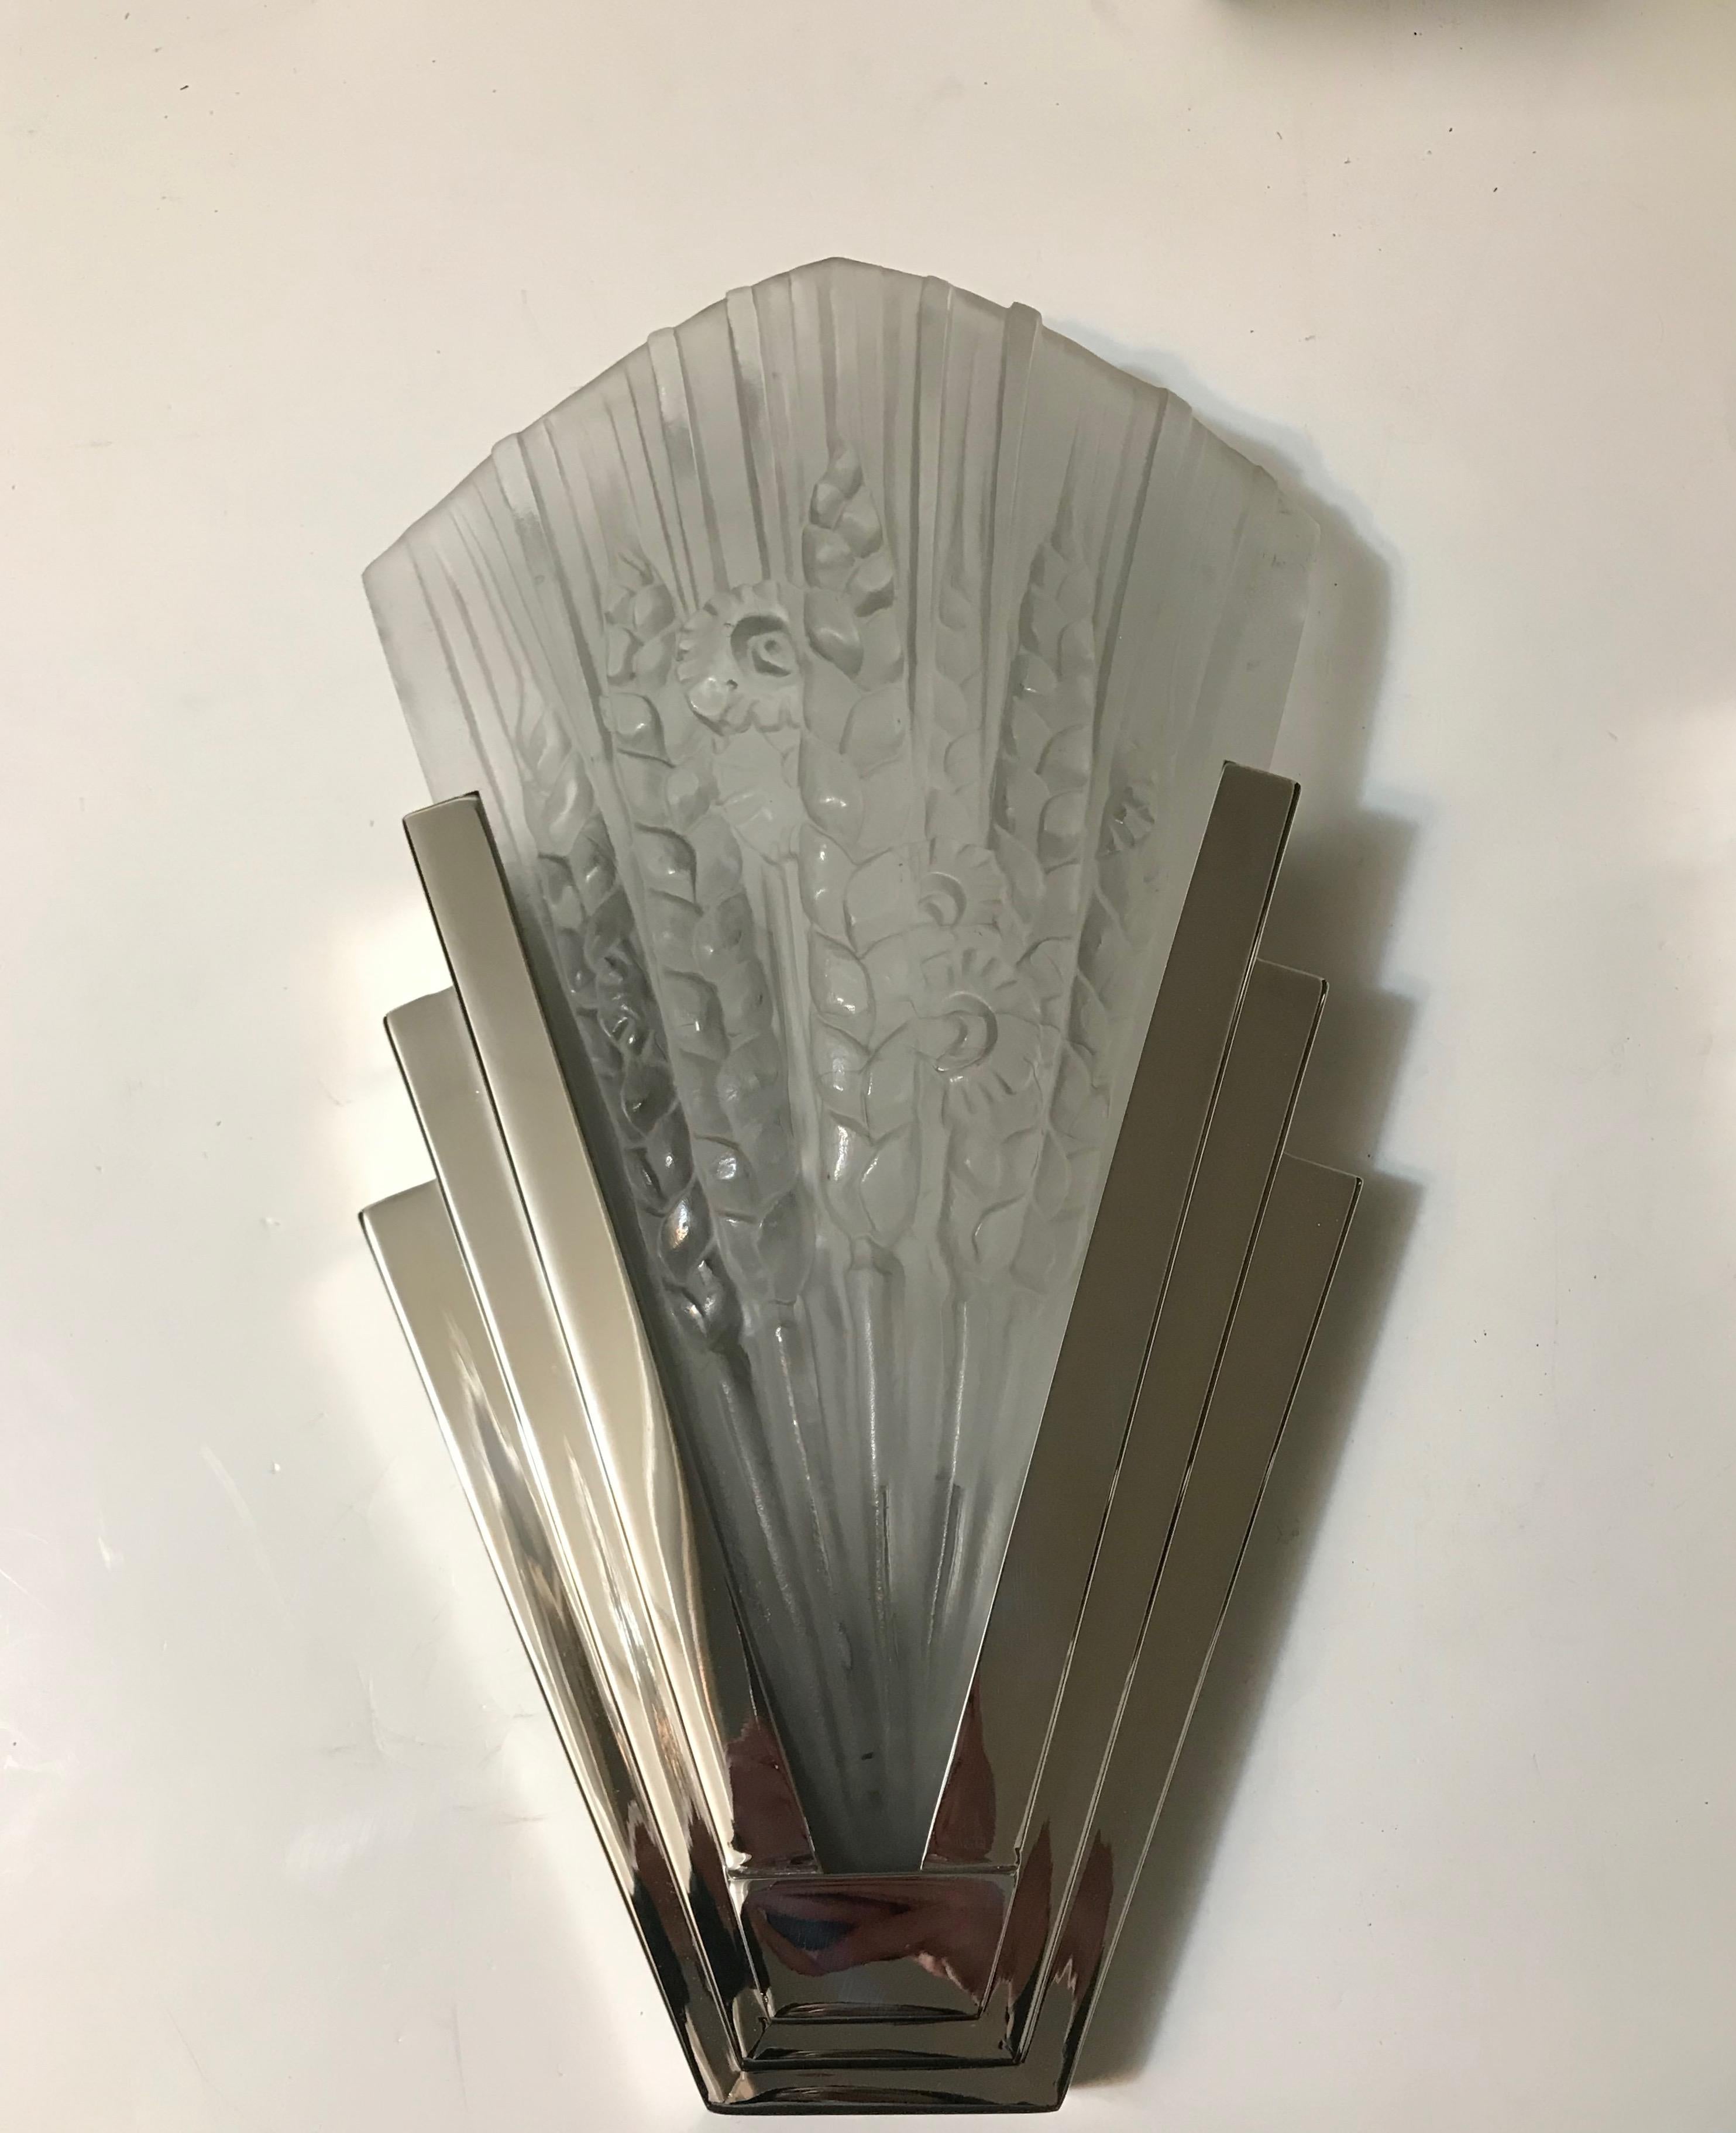 Pair of French Art Deco skyscraper sconces. Having beautiful clear frosted glass panels with floral motif. Held by polished nickel skyscraper design frames. With incredible deco details throughout. Has been rewired for American use. Each sconce